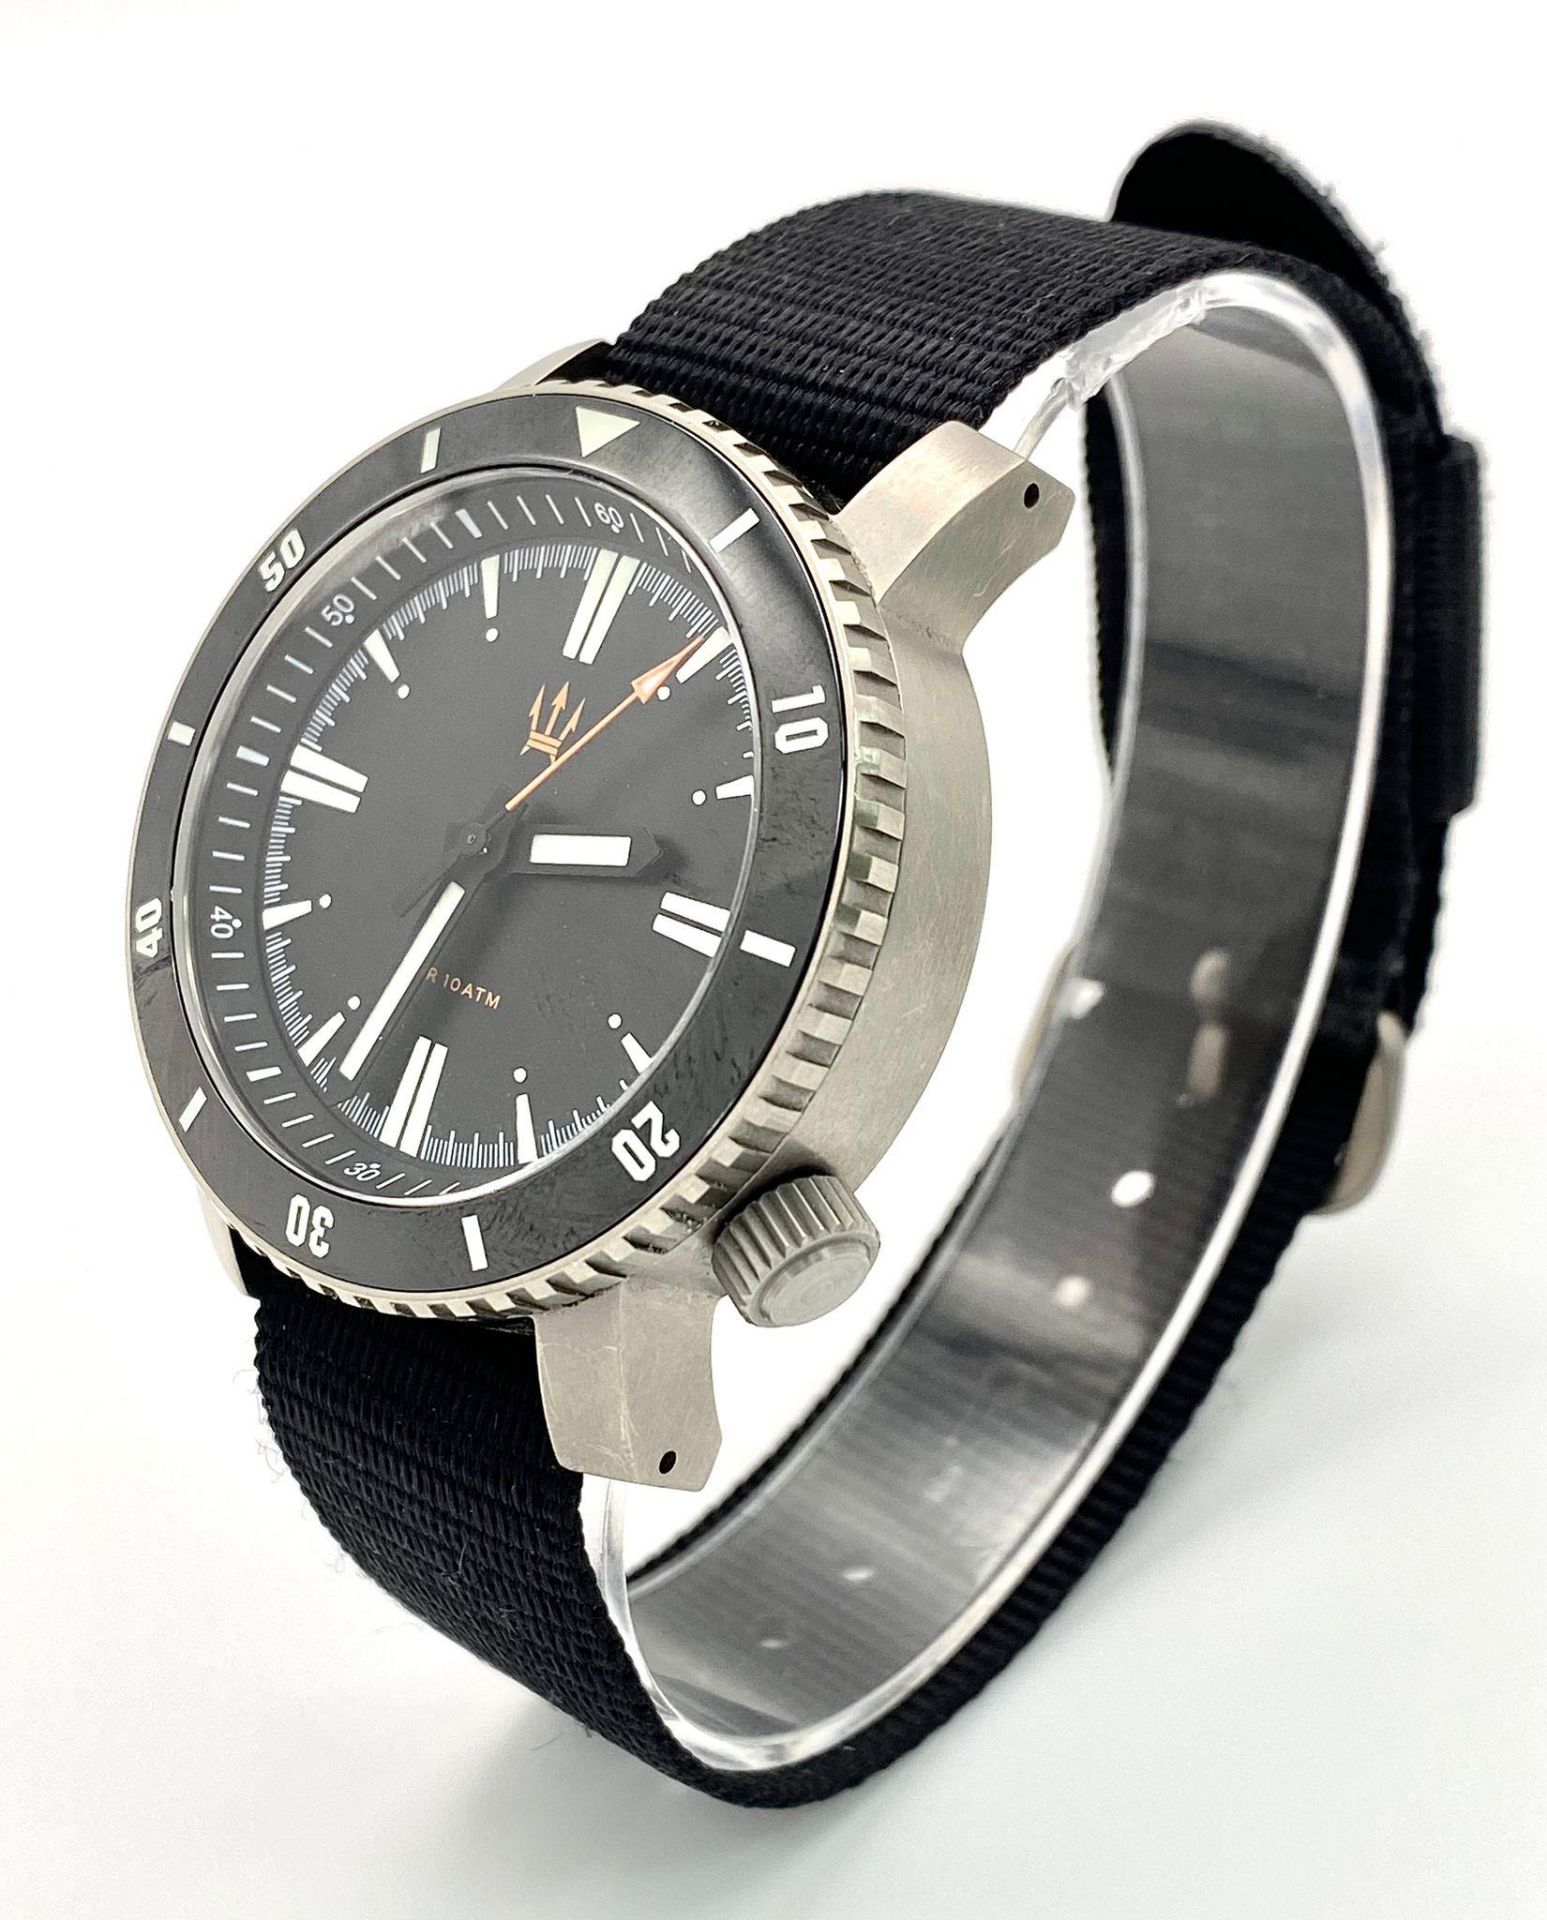 An Excellent Condition, Limited Edition, Military Specification, Automatic Divers Watch by